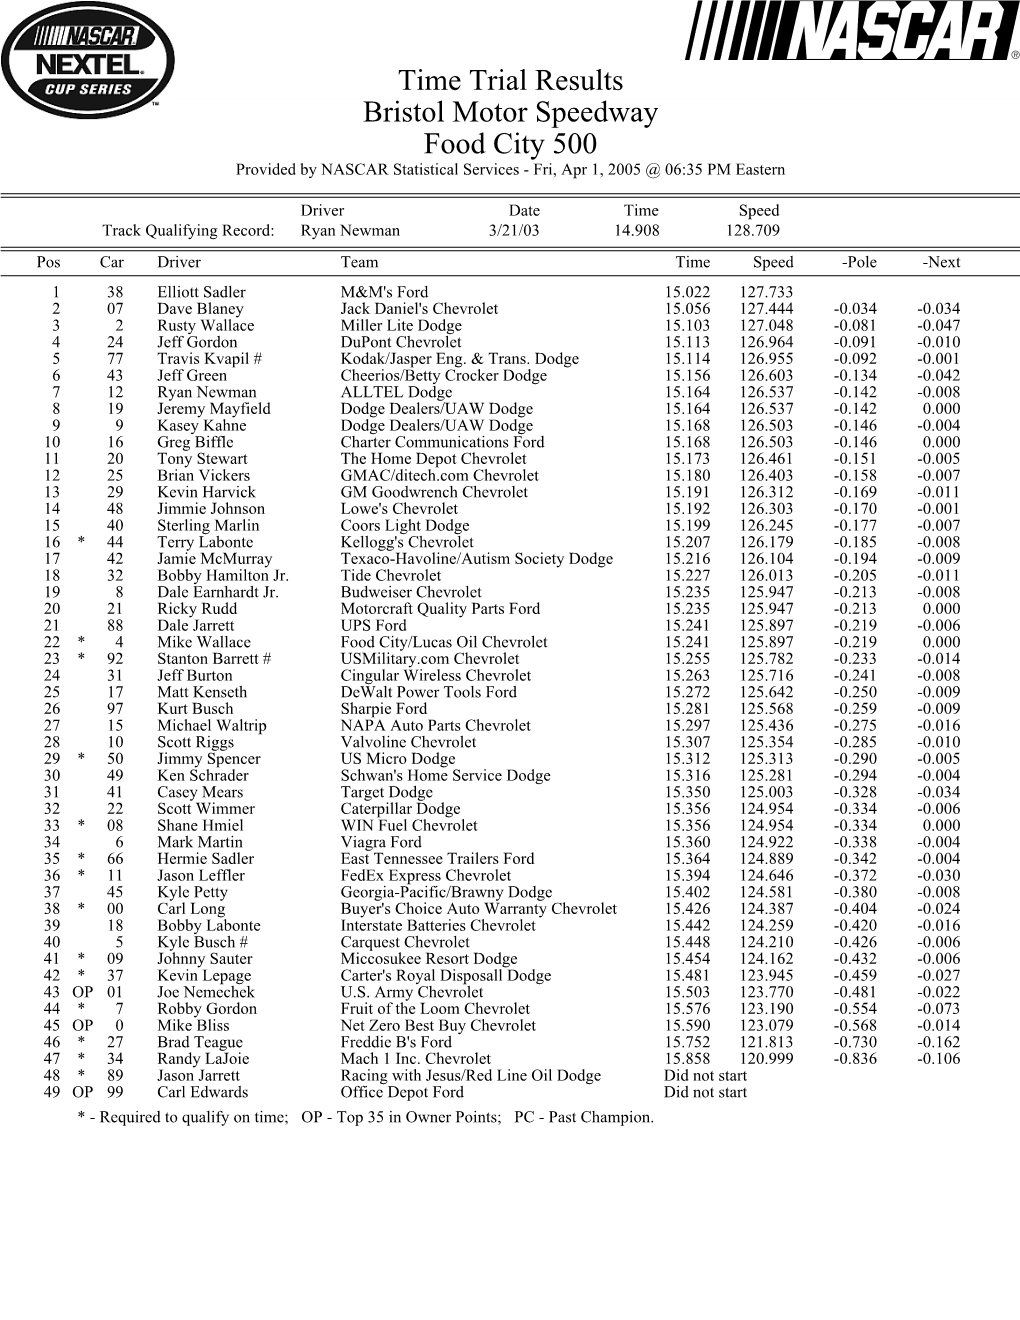 Time Trial Results Bristol Motor Speedway Food City 500 Provided by NASCAR Statistical Services - Fri, Apr 1, 2005 @ 06:35 PM Eastern